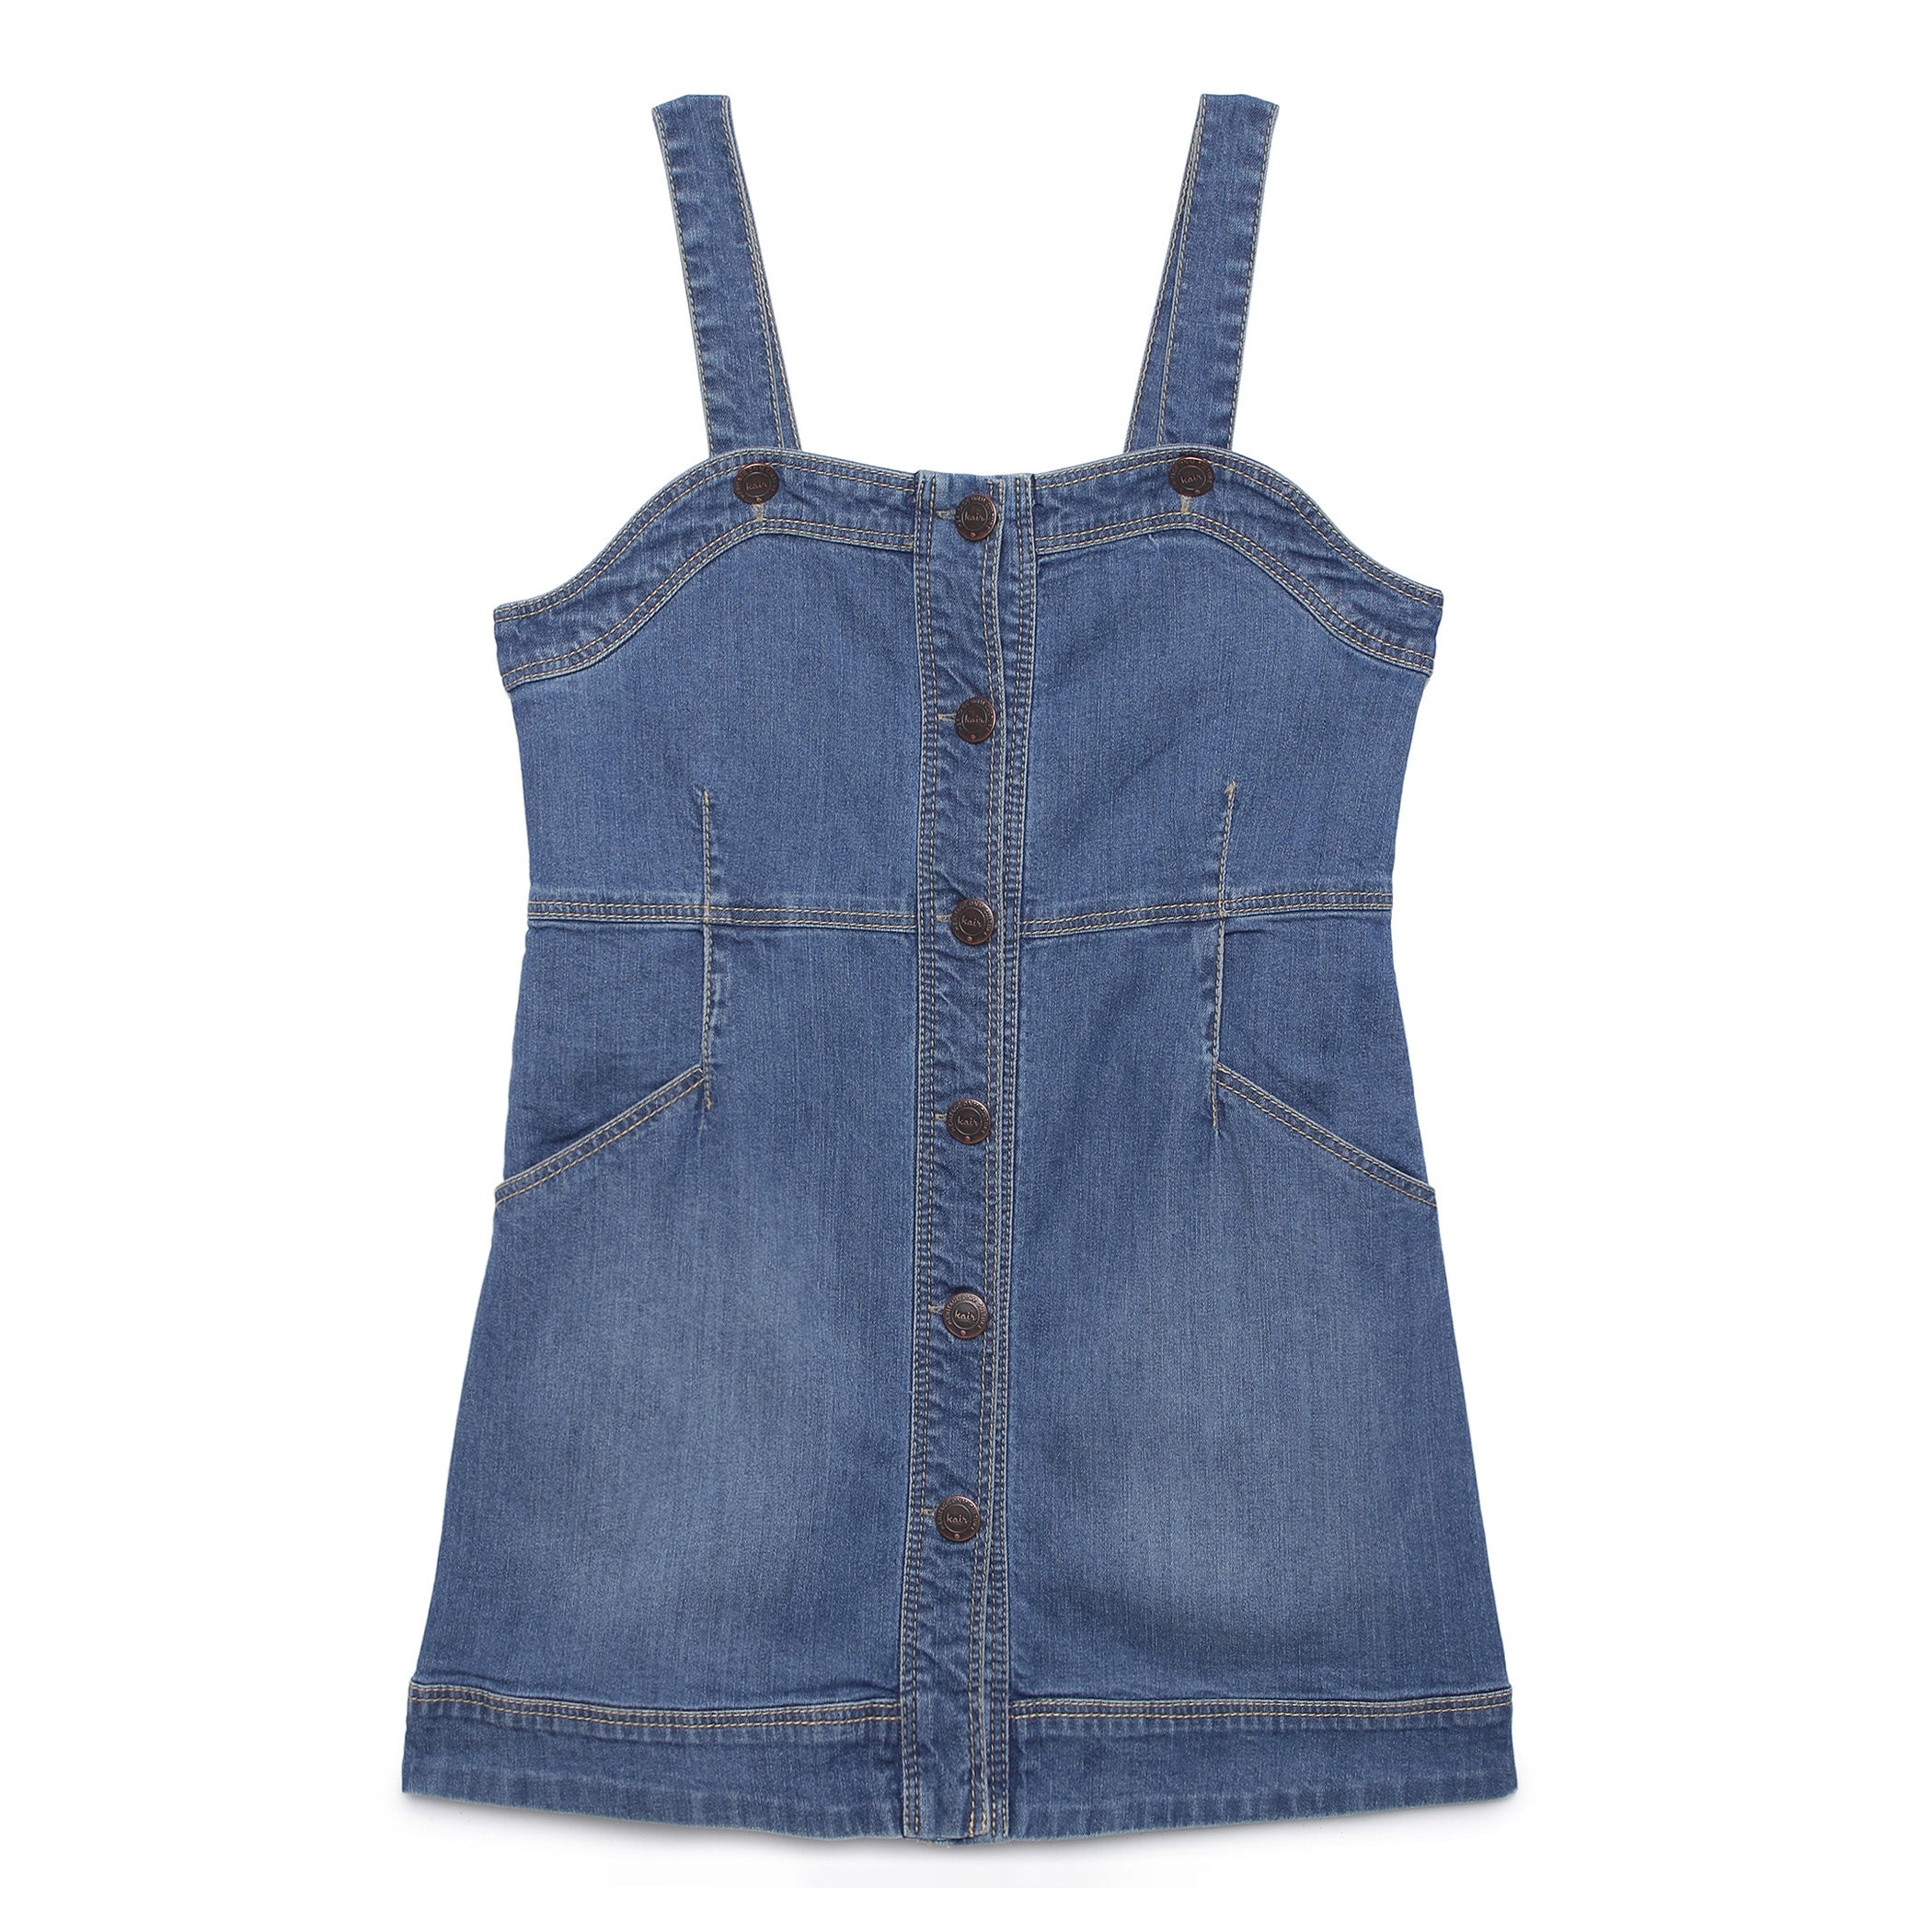 Buy denim pinafore dress for ladies in India @ Limeroad